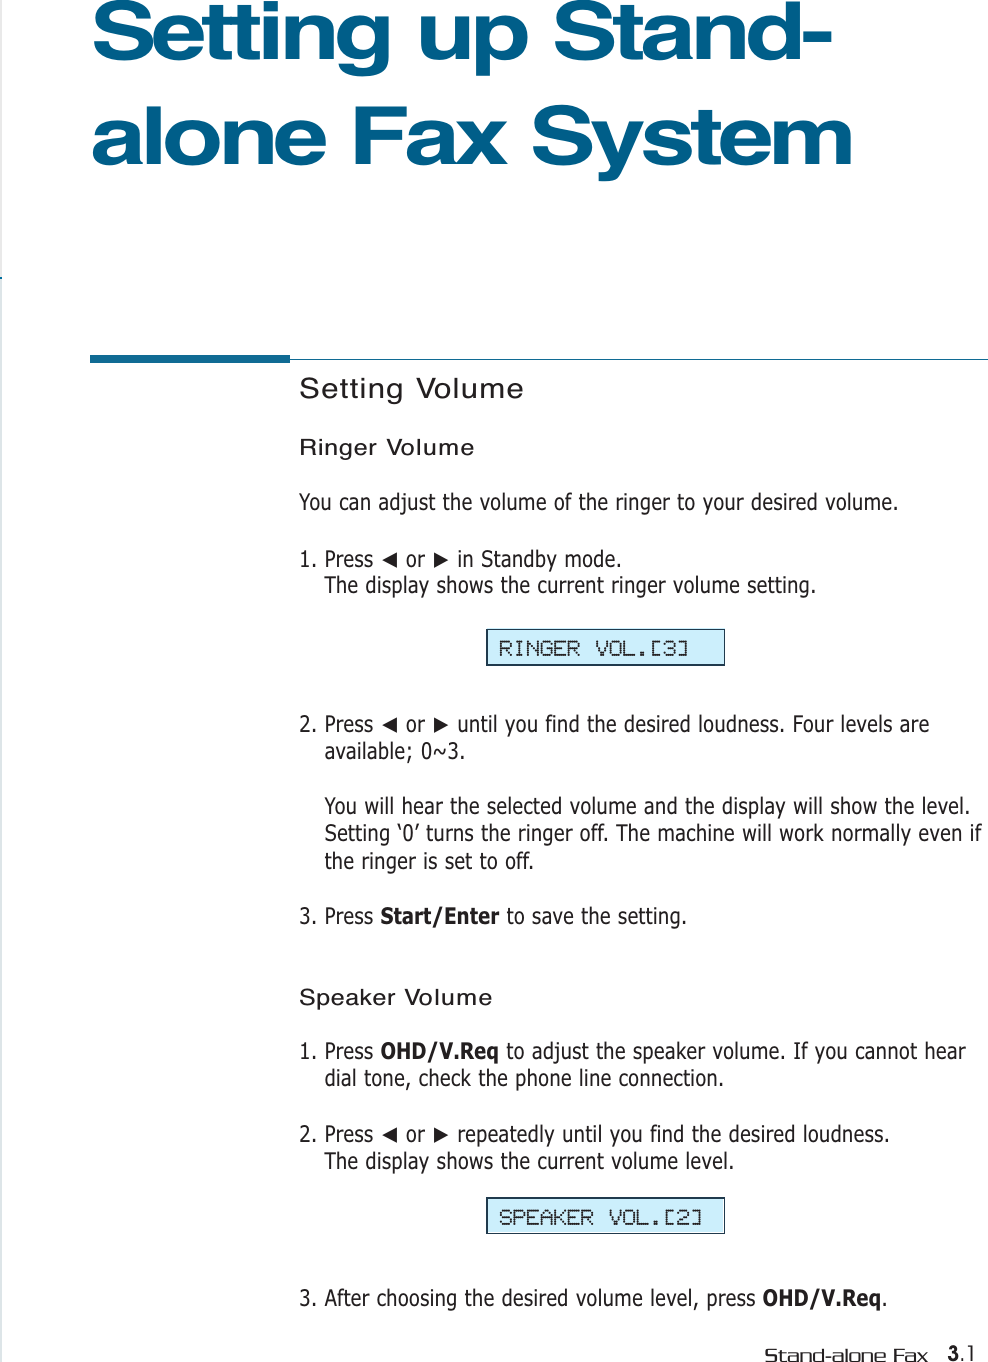 3.1Stand-alone FaxSetting Volume Ringer VolumeYou can adjust the volume of the ringer to your desired volume. 1. Press ➛or ❿in Standby mode. The display shows the current ringer volume setting.  2. Press ➛or ❿until you find the desired loudness. Four levels areavailable; 0~3. You will hear the selected volume and the display will show the level.Setting ‘0’ turns the ringer off. The machine will work normally even ifthe ringer is set to off.3. Press Start/Enter to save the setting.Speaker Volume1. Press OHD/V.Req to adjust the speaker volume. If you cannot heardial tone, check the phone line connection.2. Press ➛or ❿repeatedly until you find the desired loudness. The display shows the current volume level.3. After choosing the desired volume level, press OHD/V.Req.Setting up Stand-alone Fax SystemRINGER VOL.[3]SPEAKER VOL.[2]